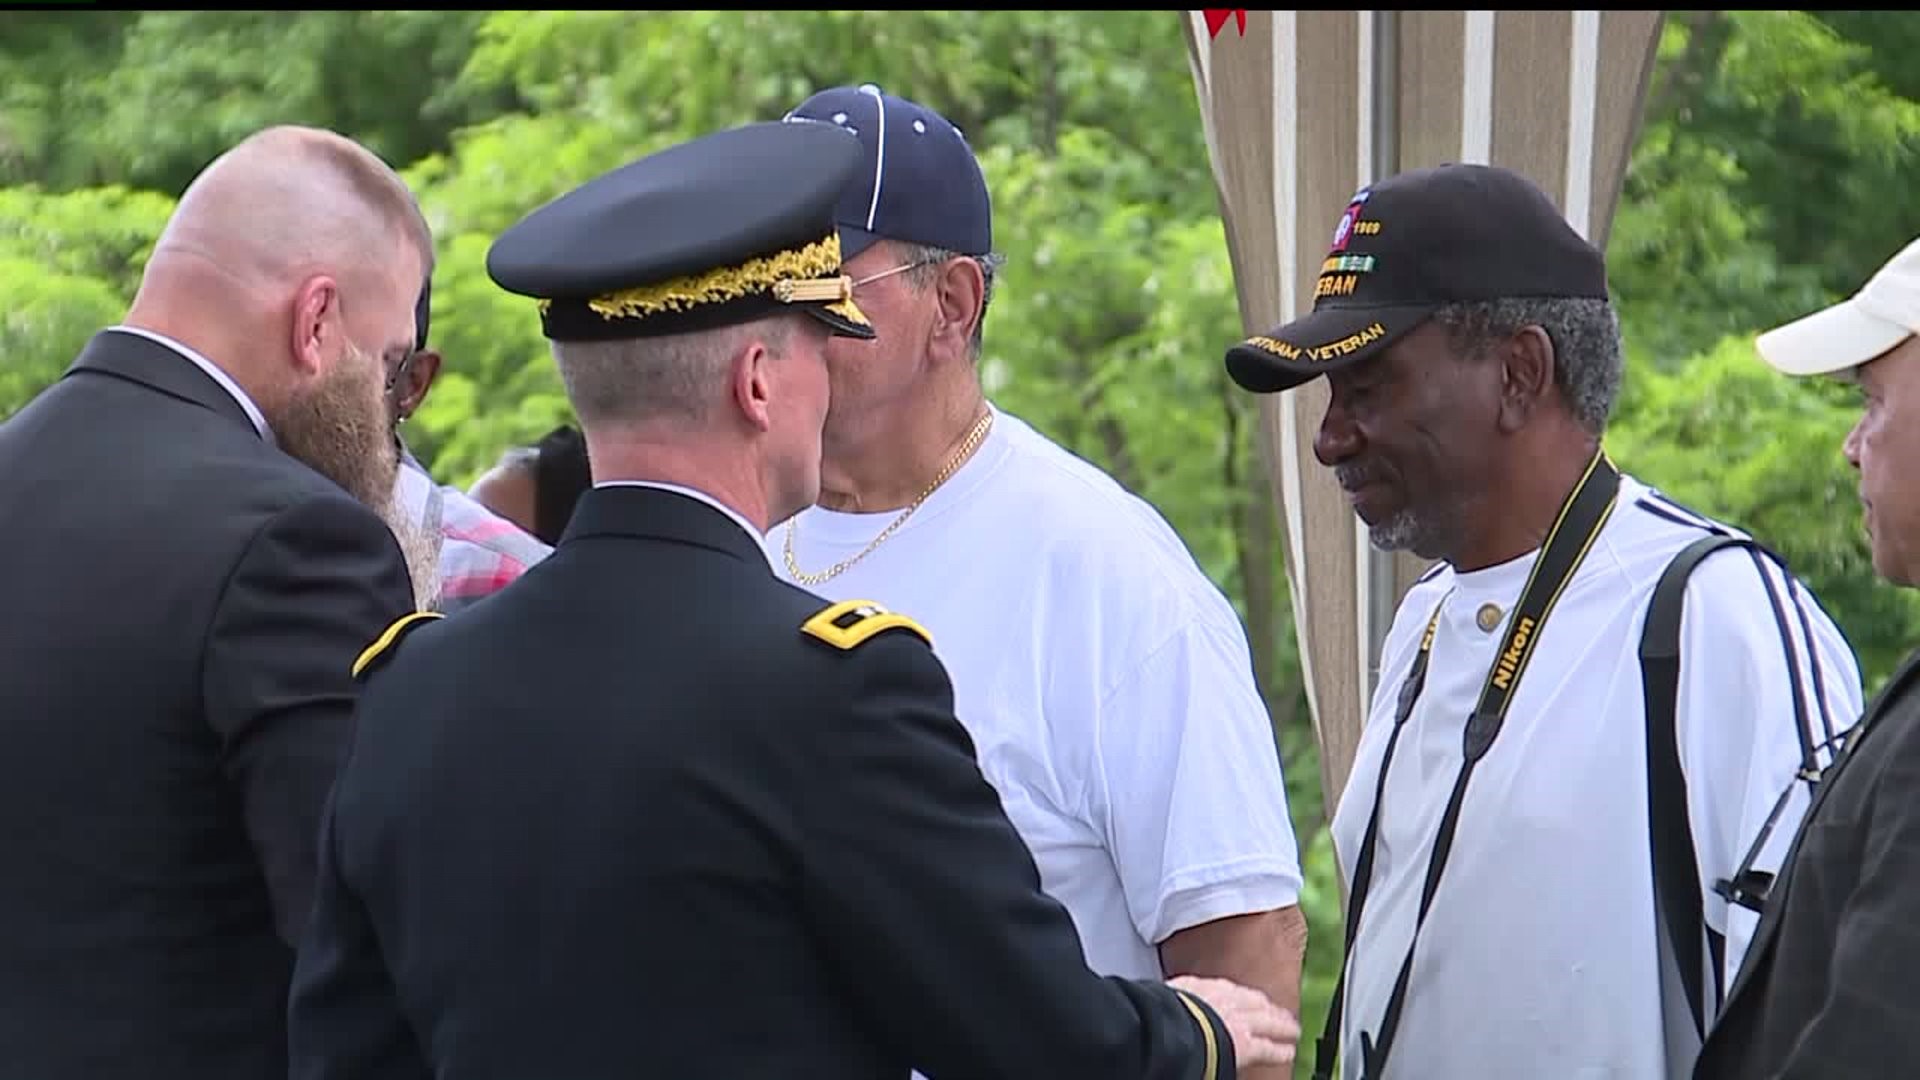 African American veterans honored at Memorial Day service in Dauphin County